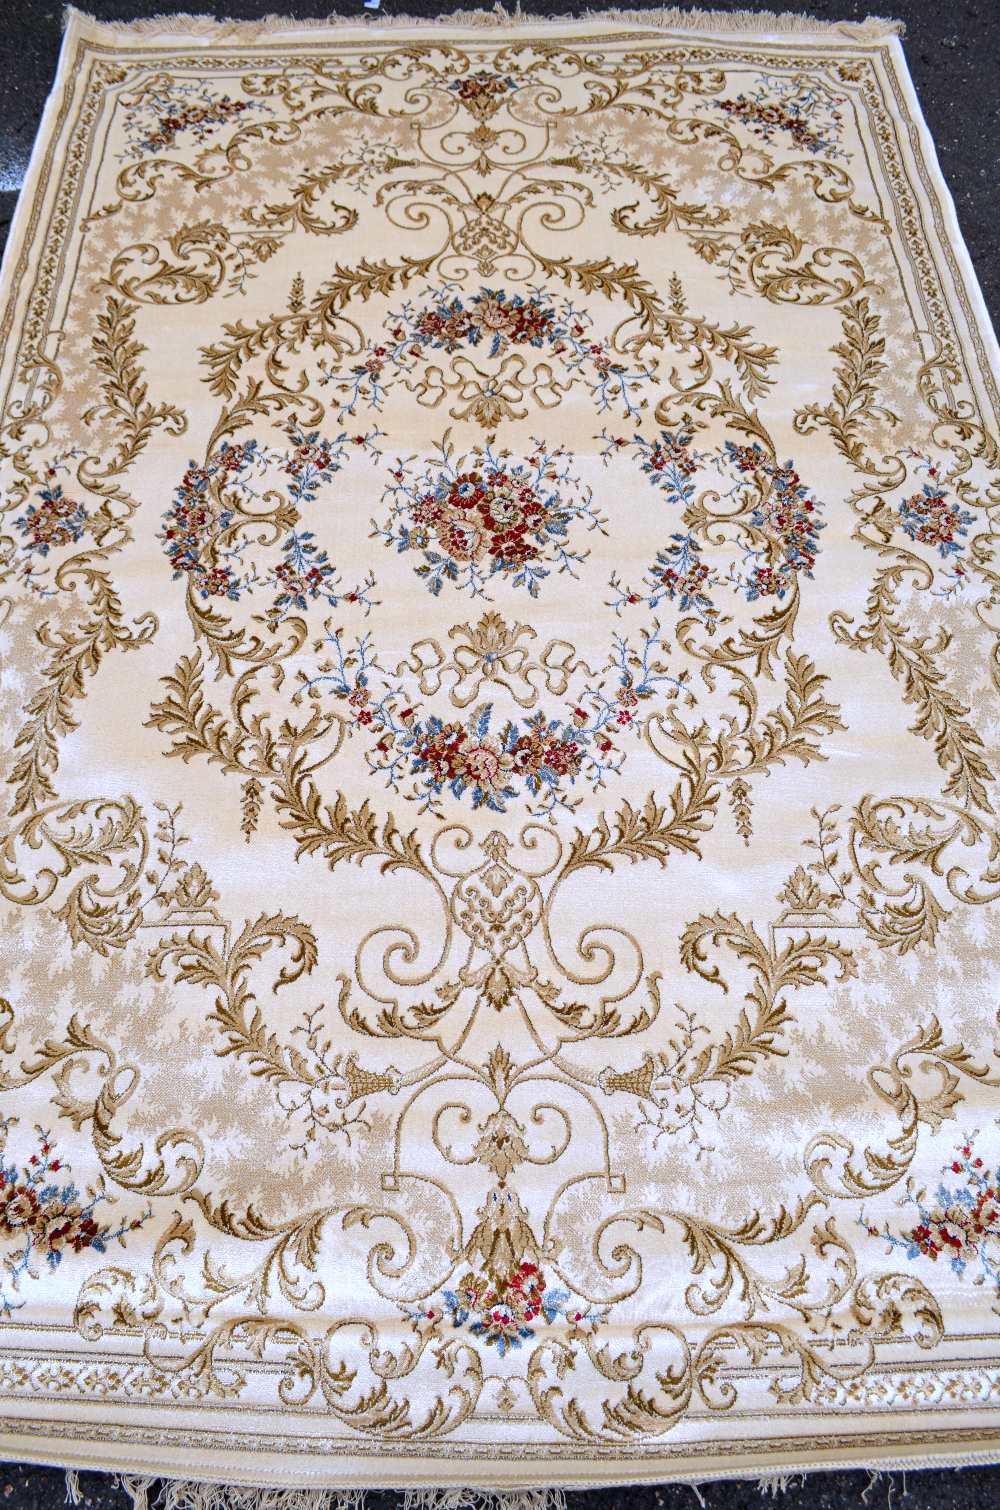 Ivory ground Kashmir rug with a classical floral design, 2.4m x 1.6m